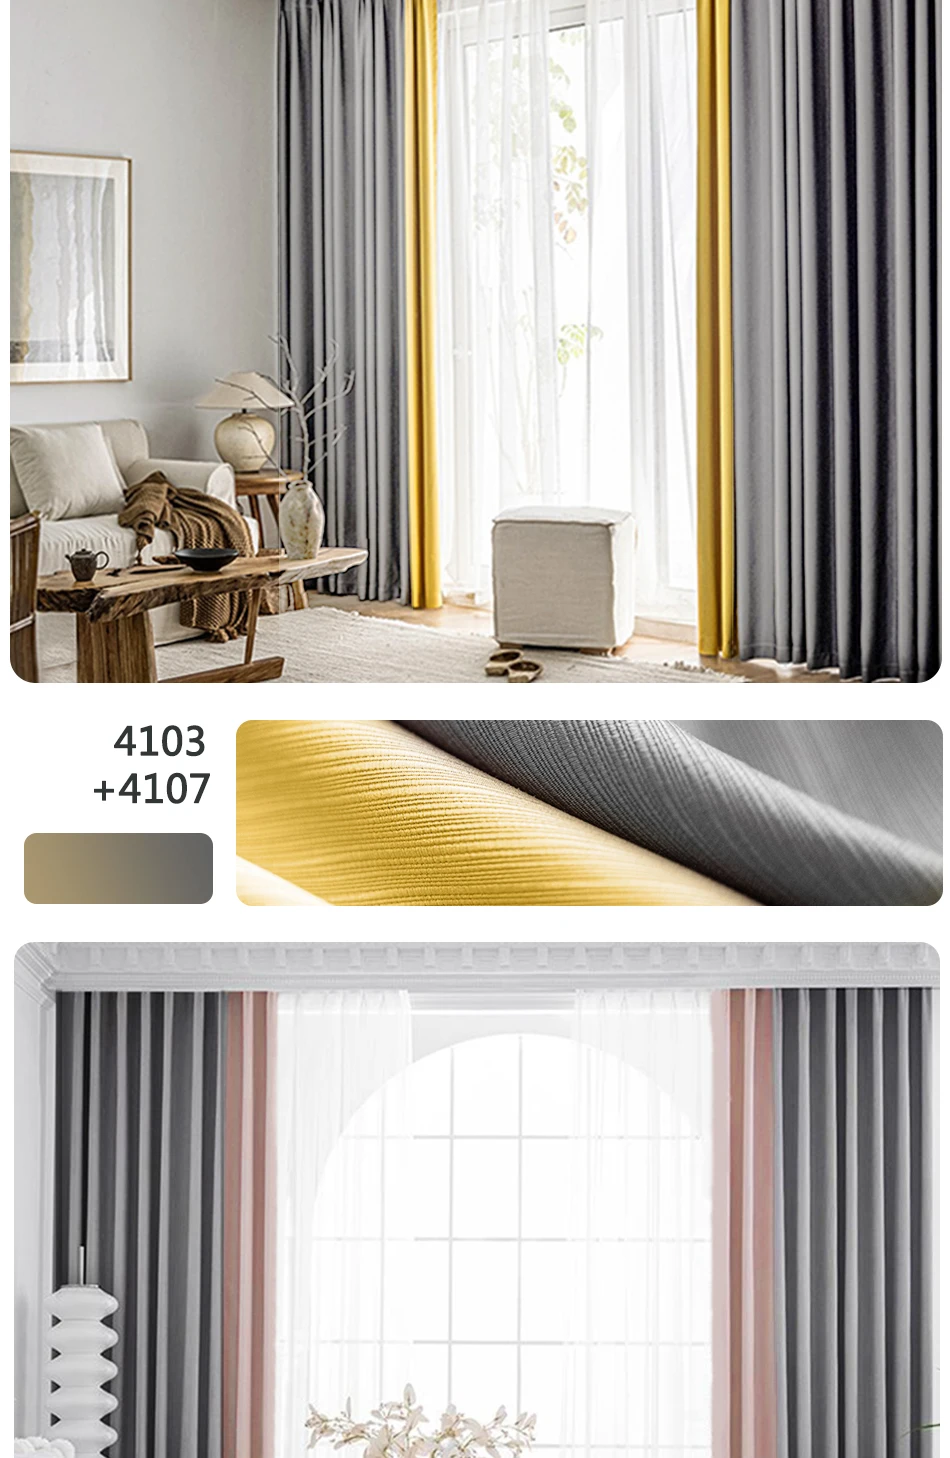 grey curtains LAEWIN - curtains mix color for living room for bedroom window curtain blackout cortinas de dormitorio set luxury elegant home lace curtains